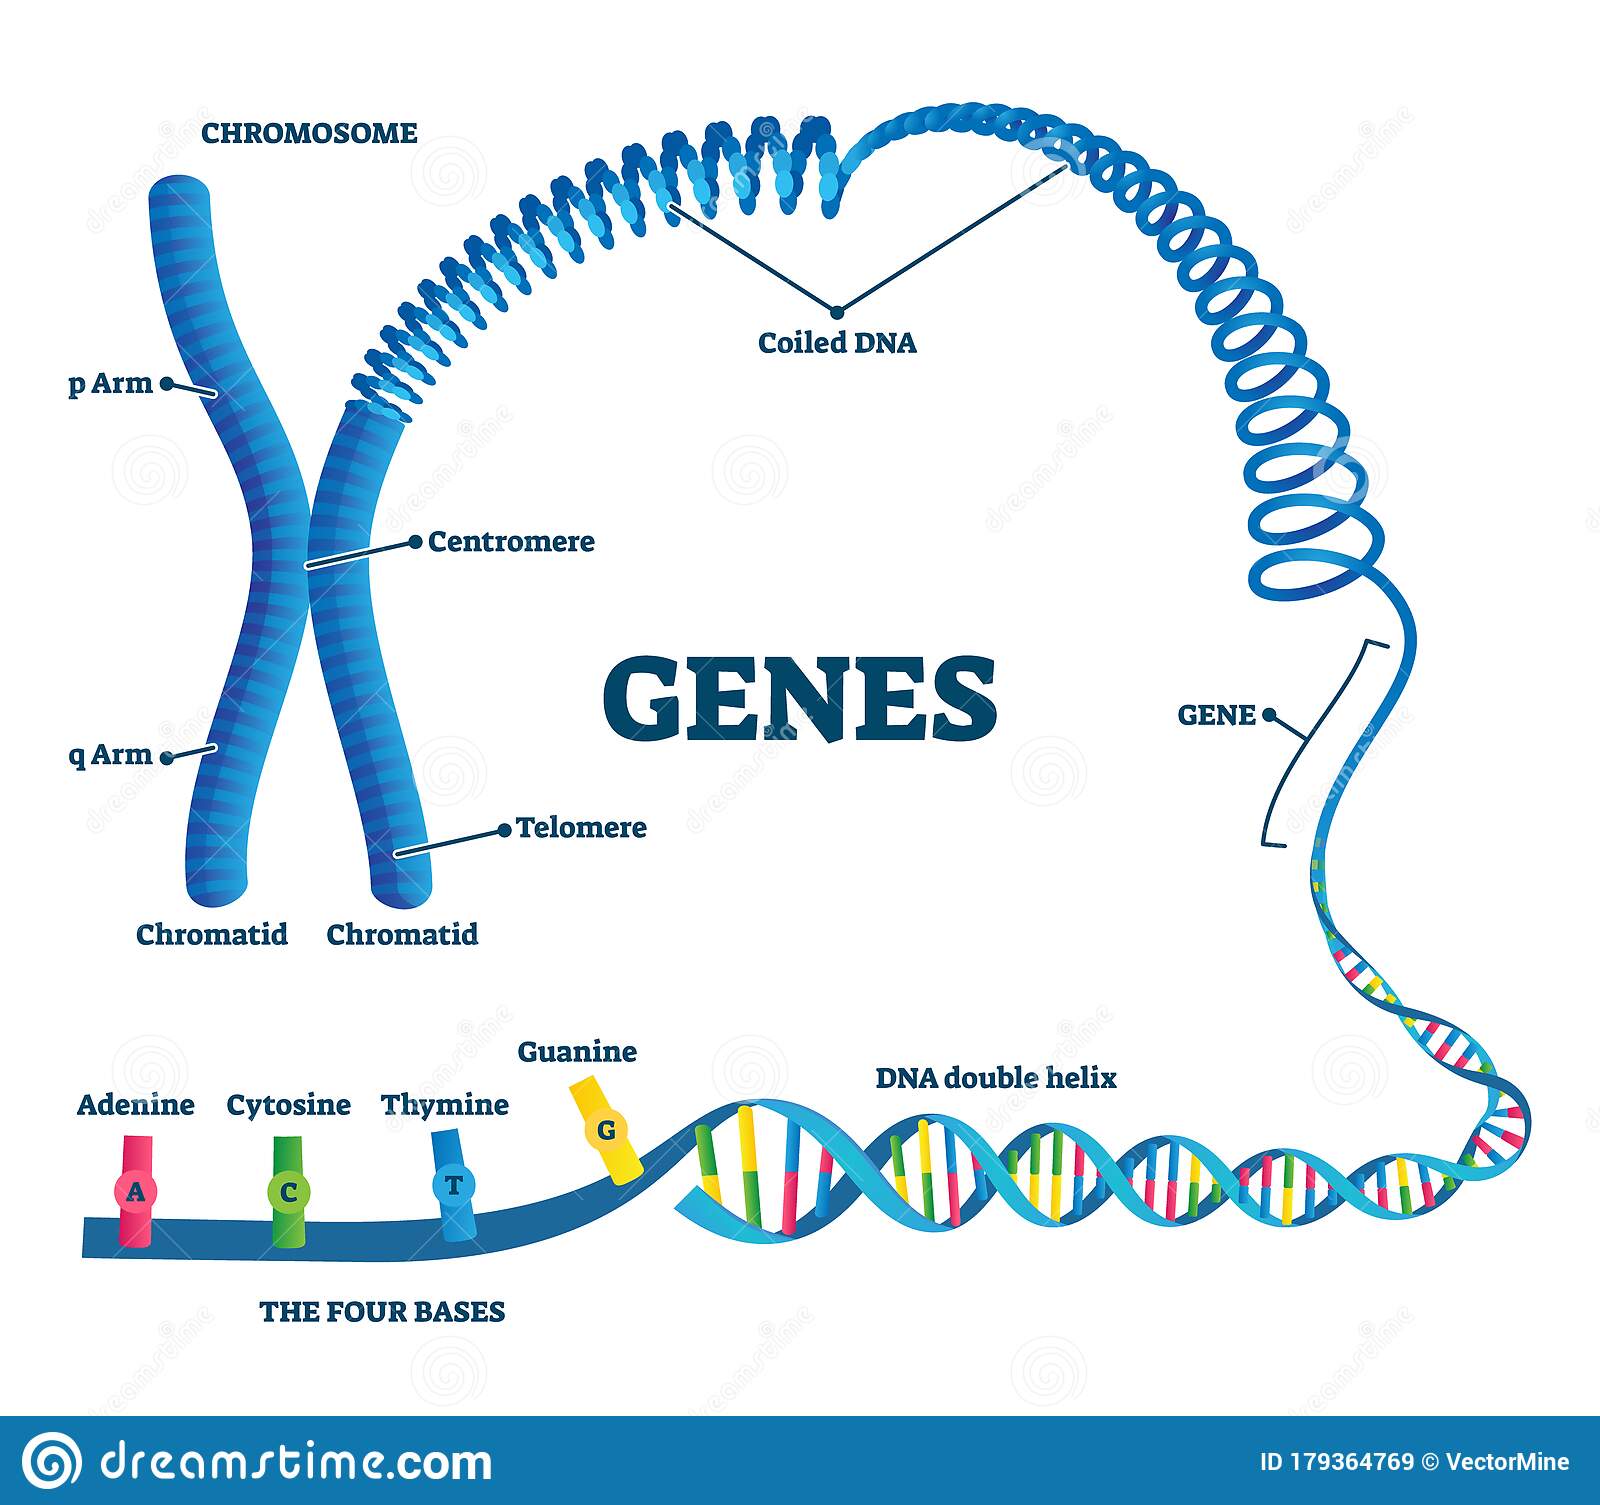 dna structure and replication - Class 8 - Quizizz